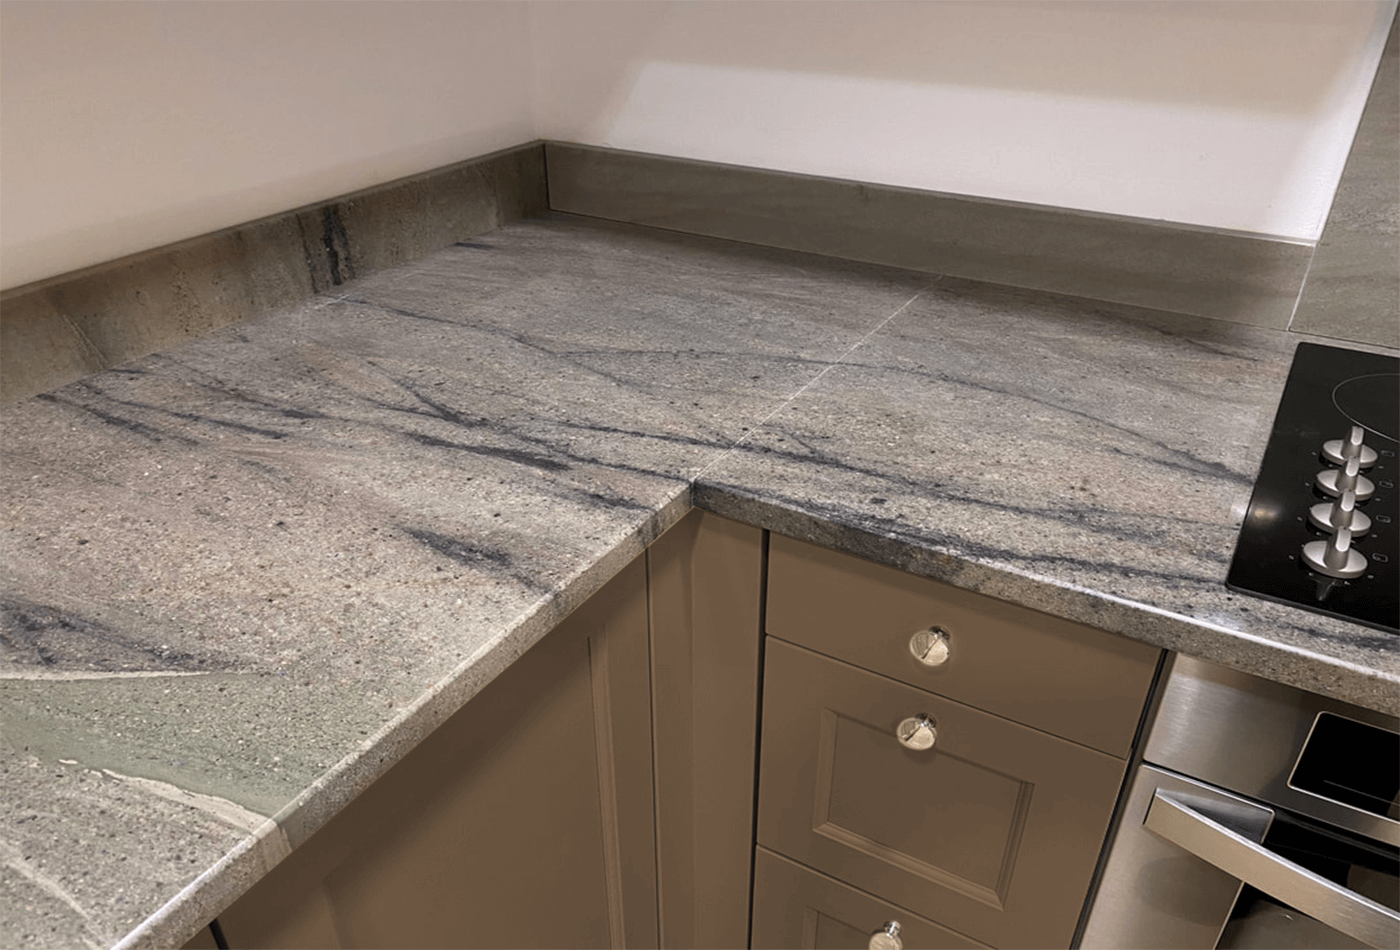 Get Remarkable Quartzite Stone that makes your Kitchen Looks Stunning